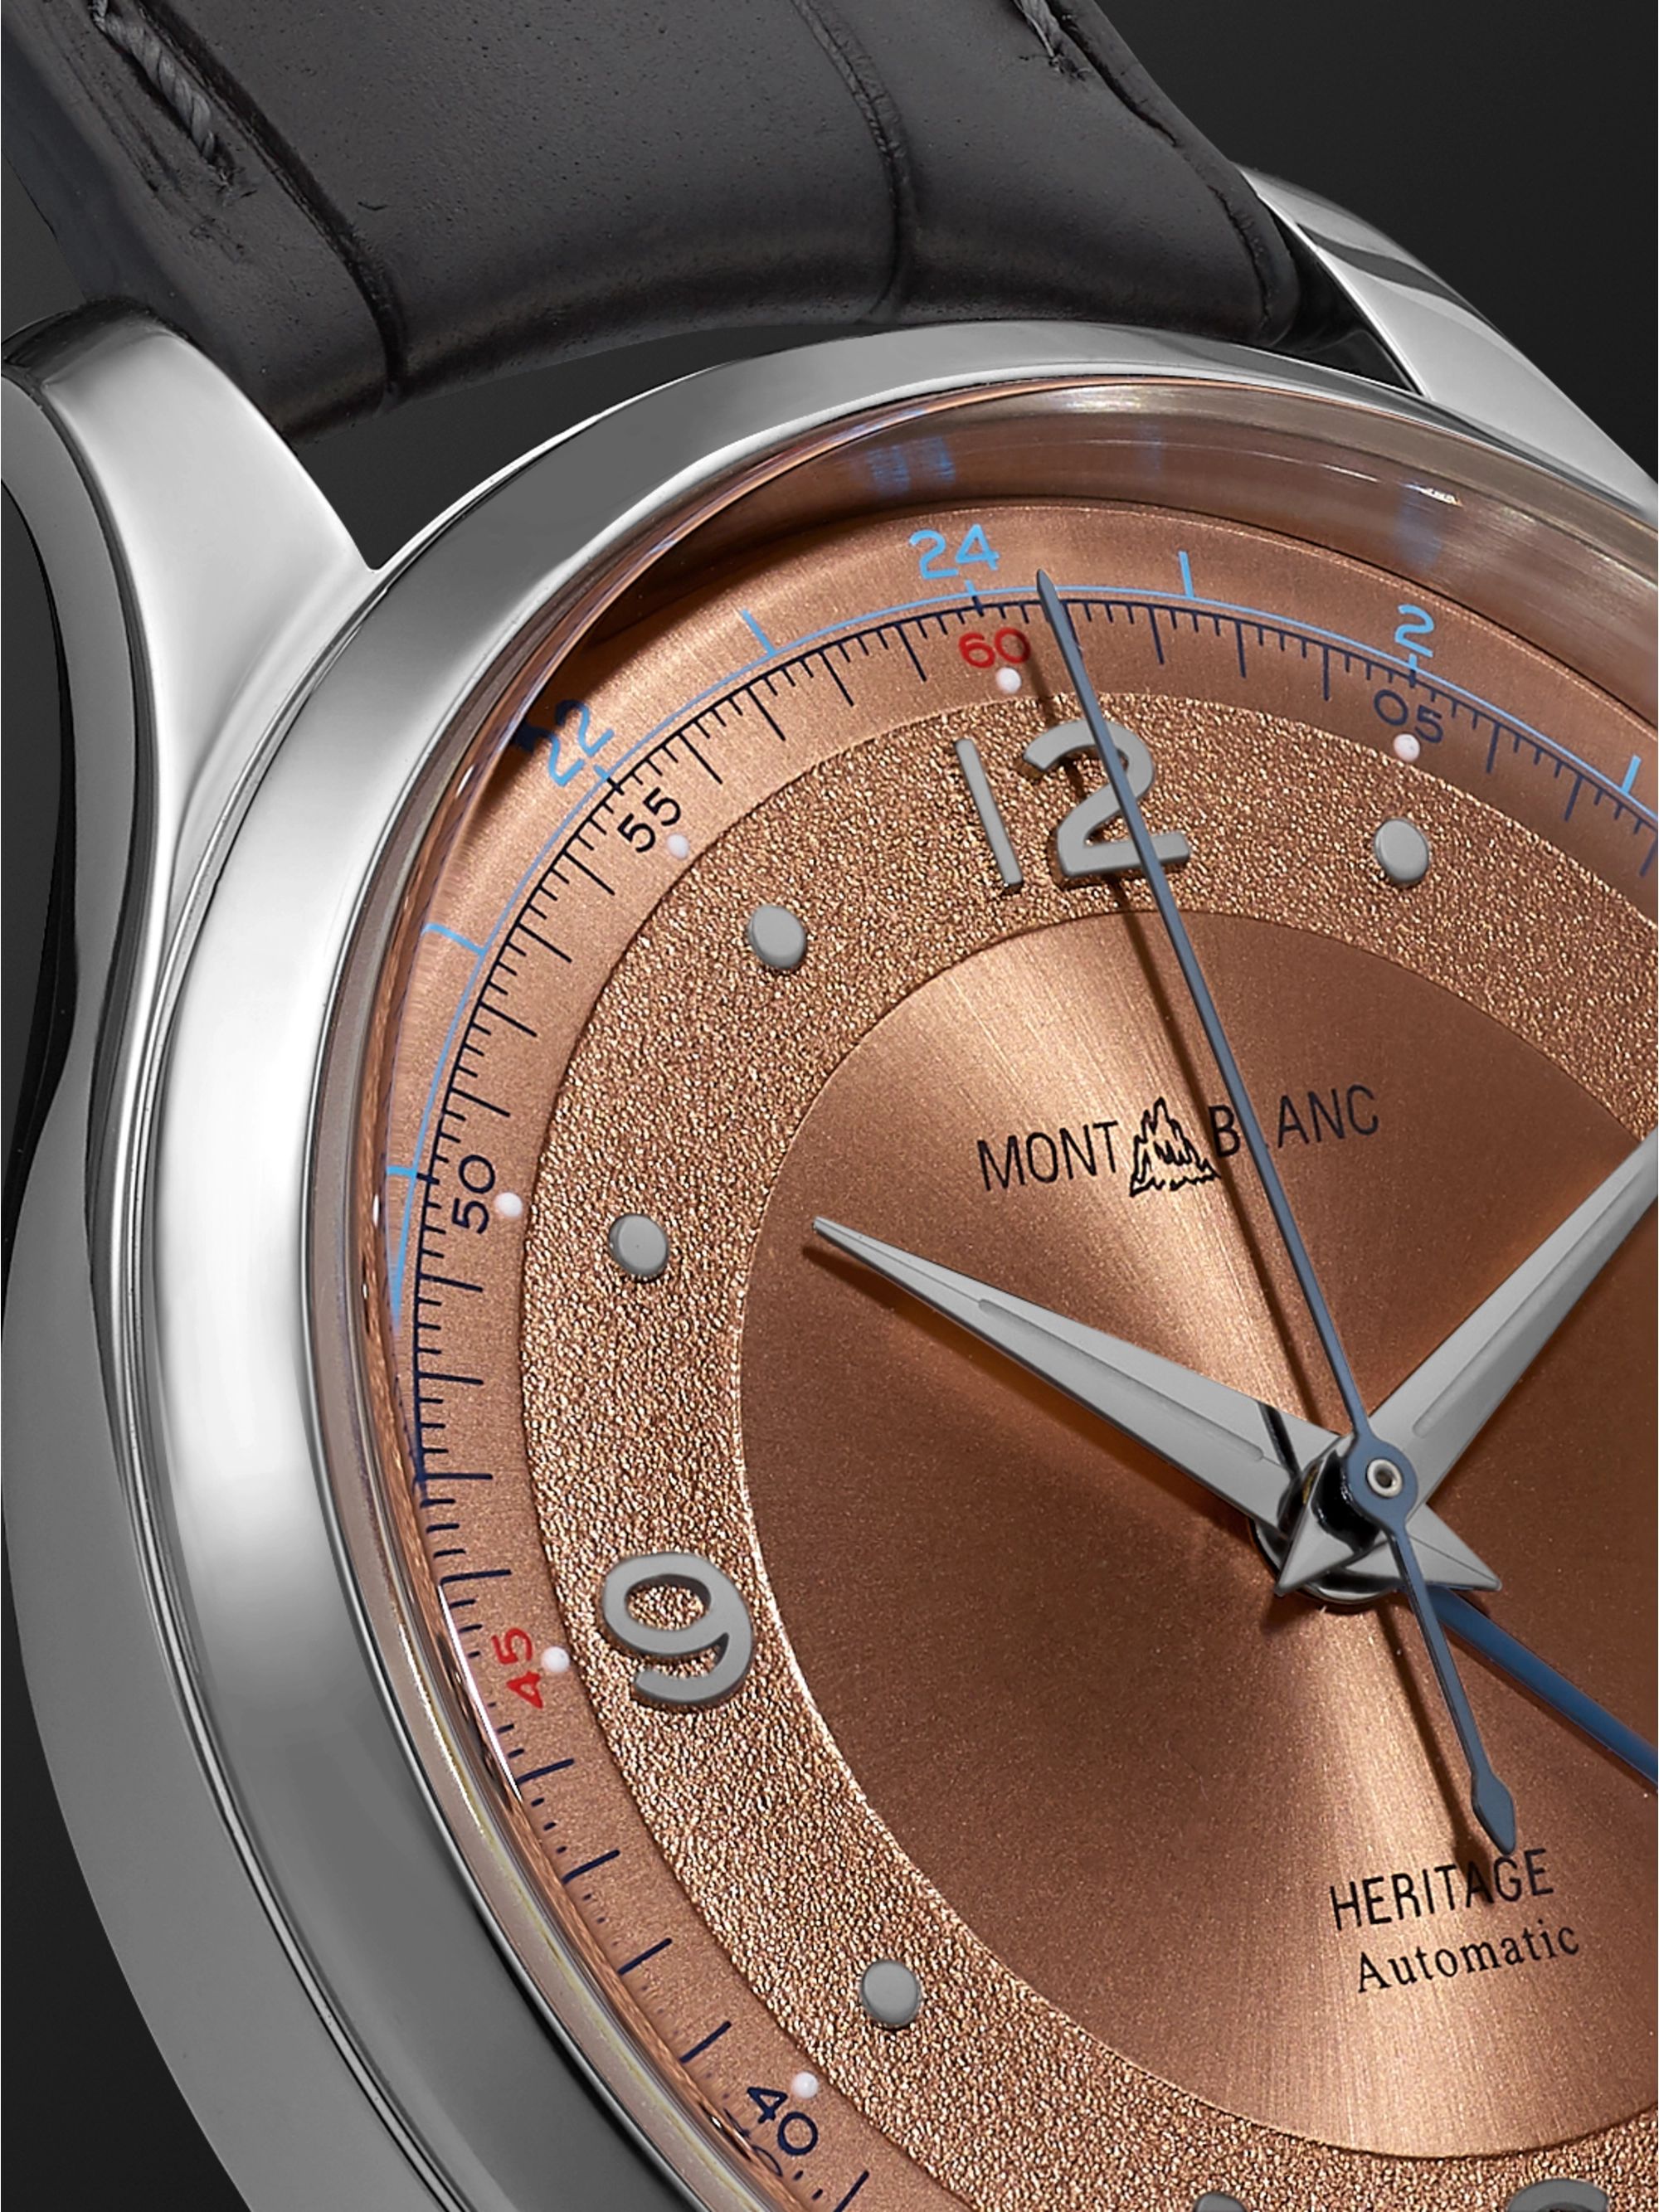 MONTBLANC Heritage GMT Automatic 40mm Stainless Steel and Alligator Watch, Ref. No. 119950